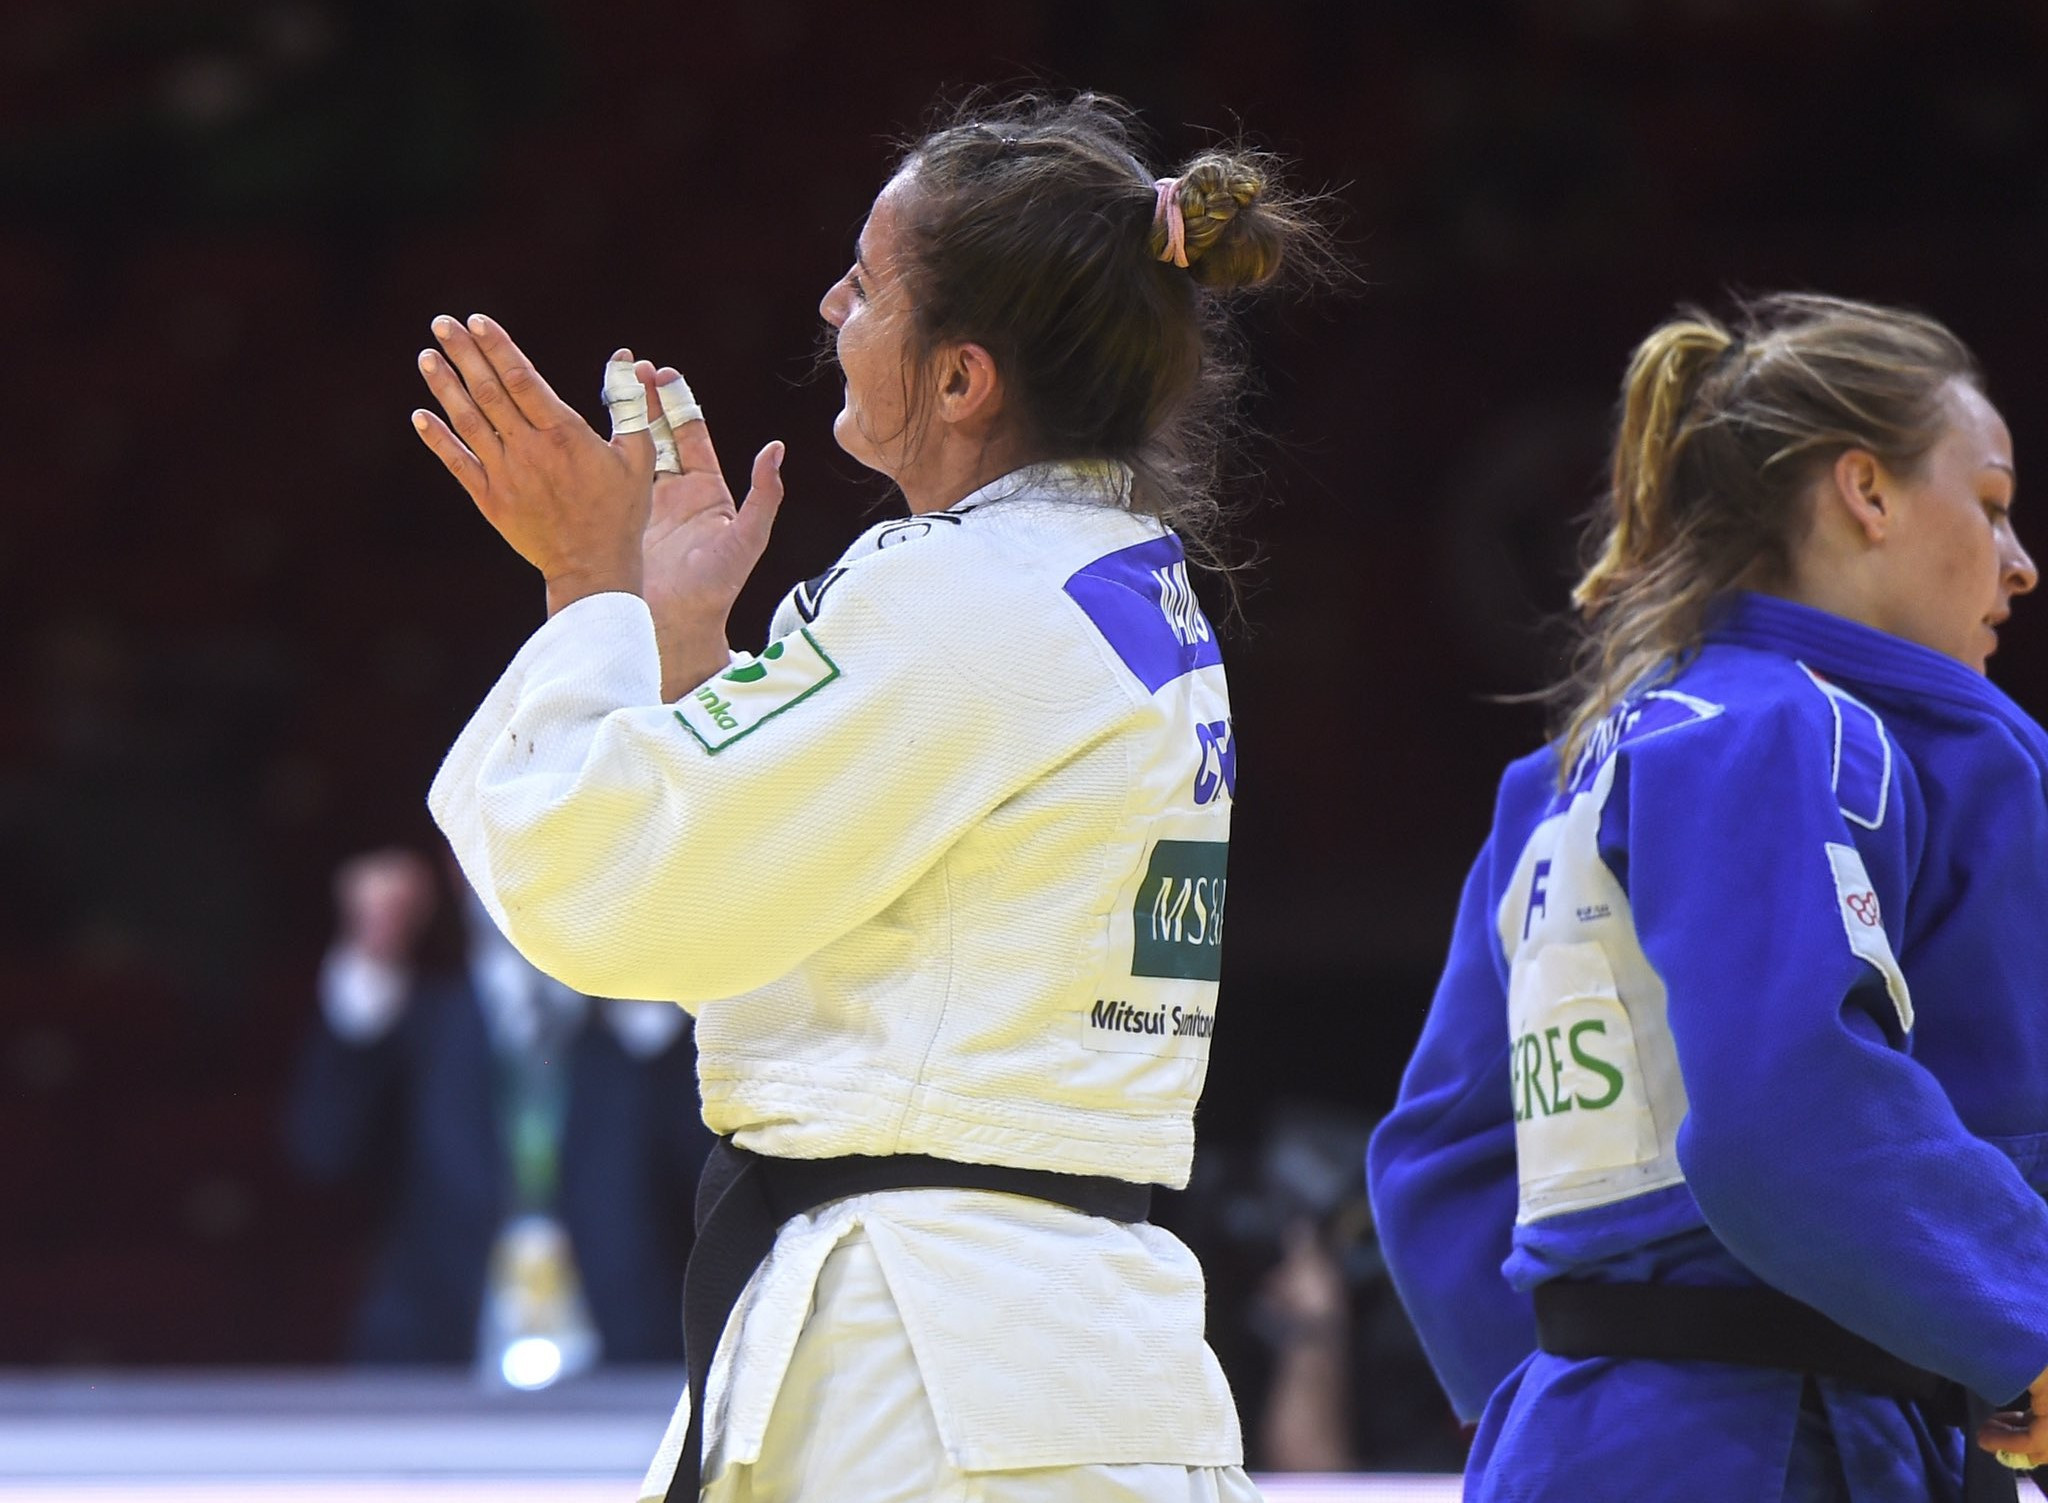 Barbara Matić beat three of the four medalists at last years World Championship to secure the women's under-70kg title ©IJF